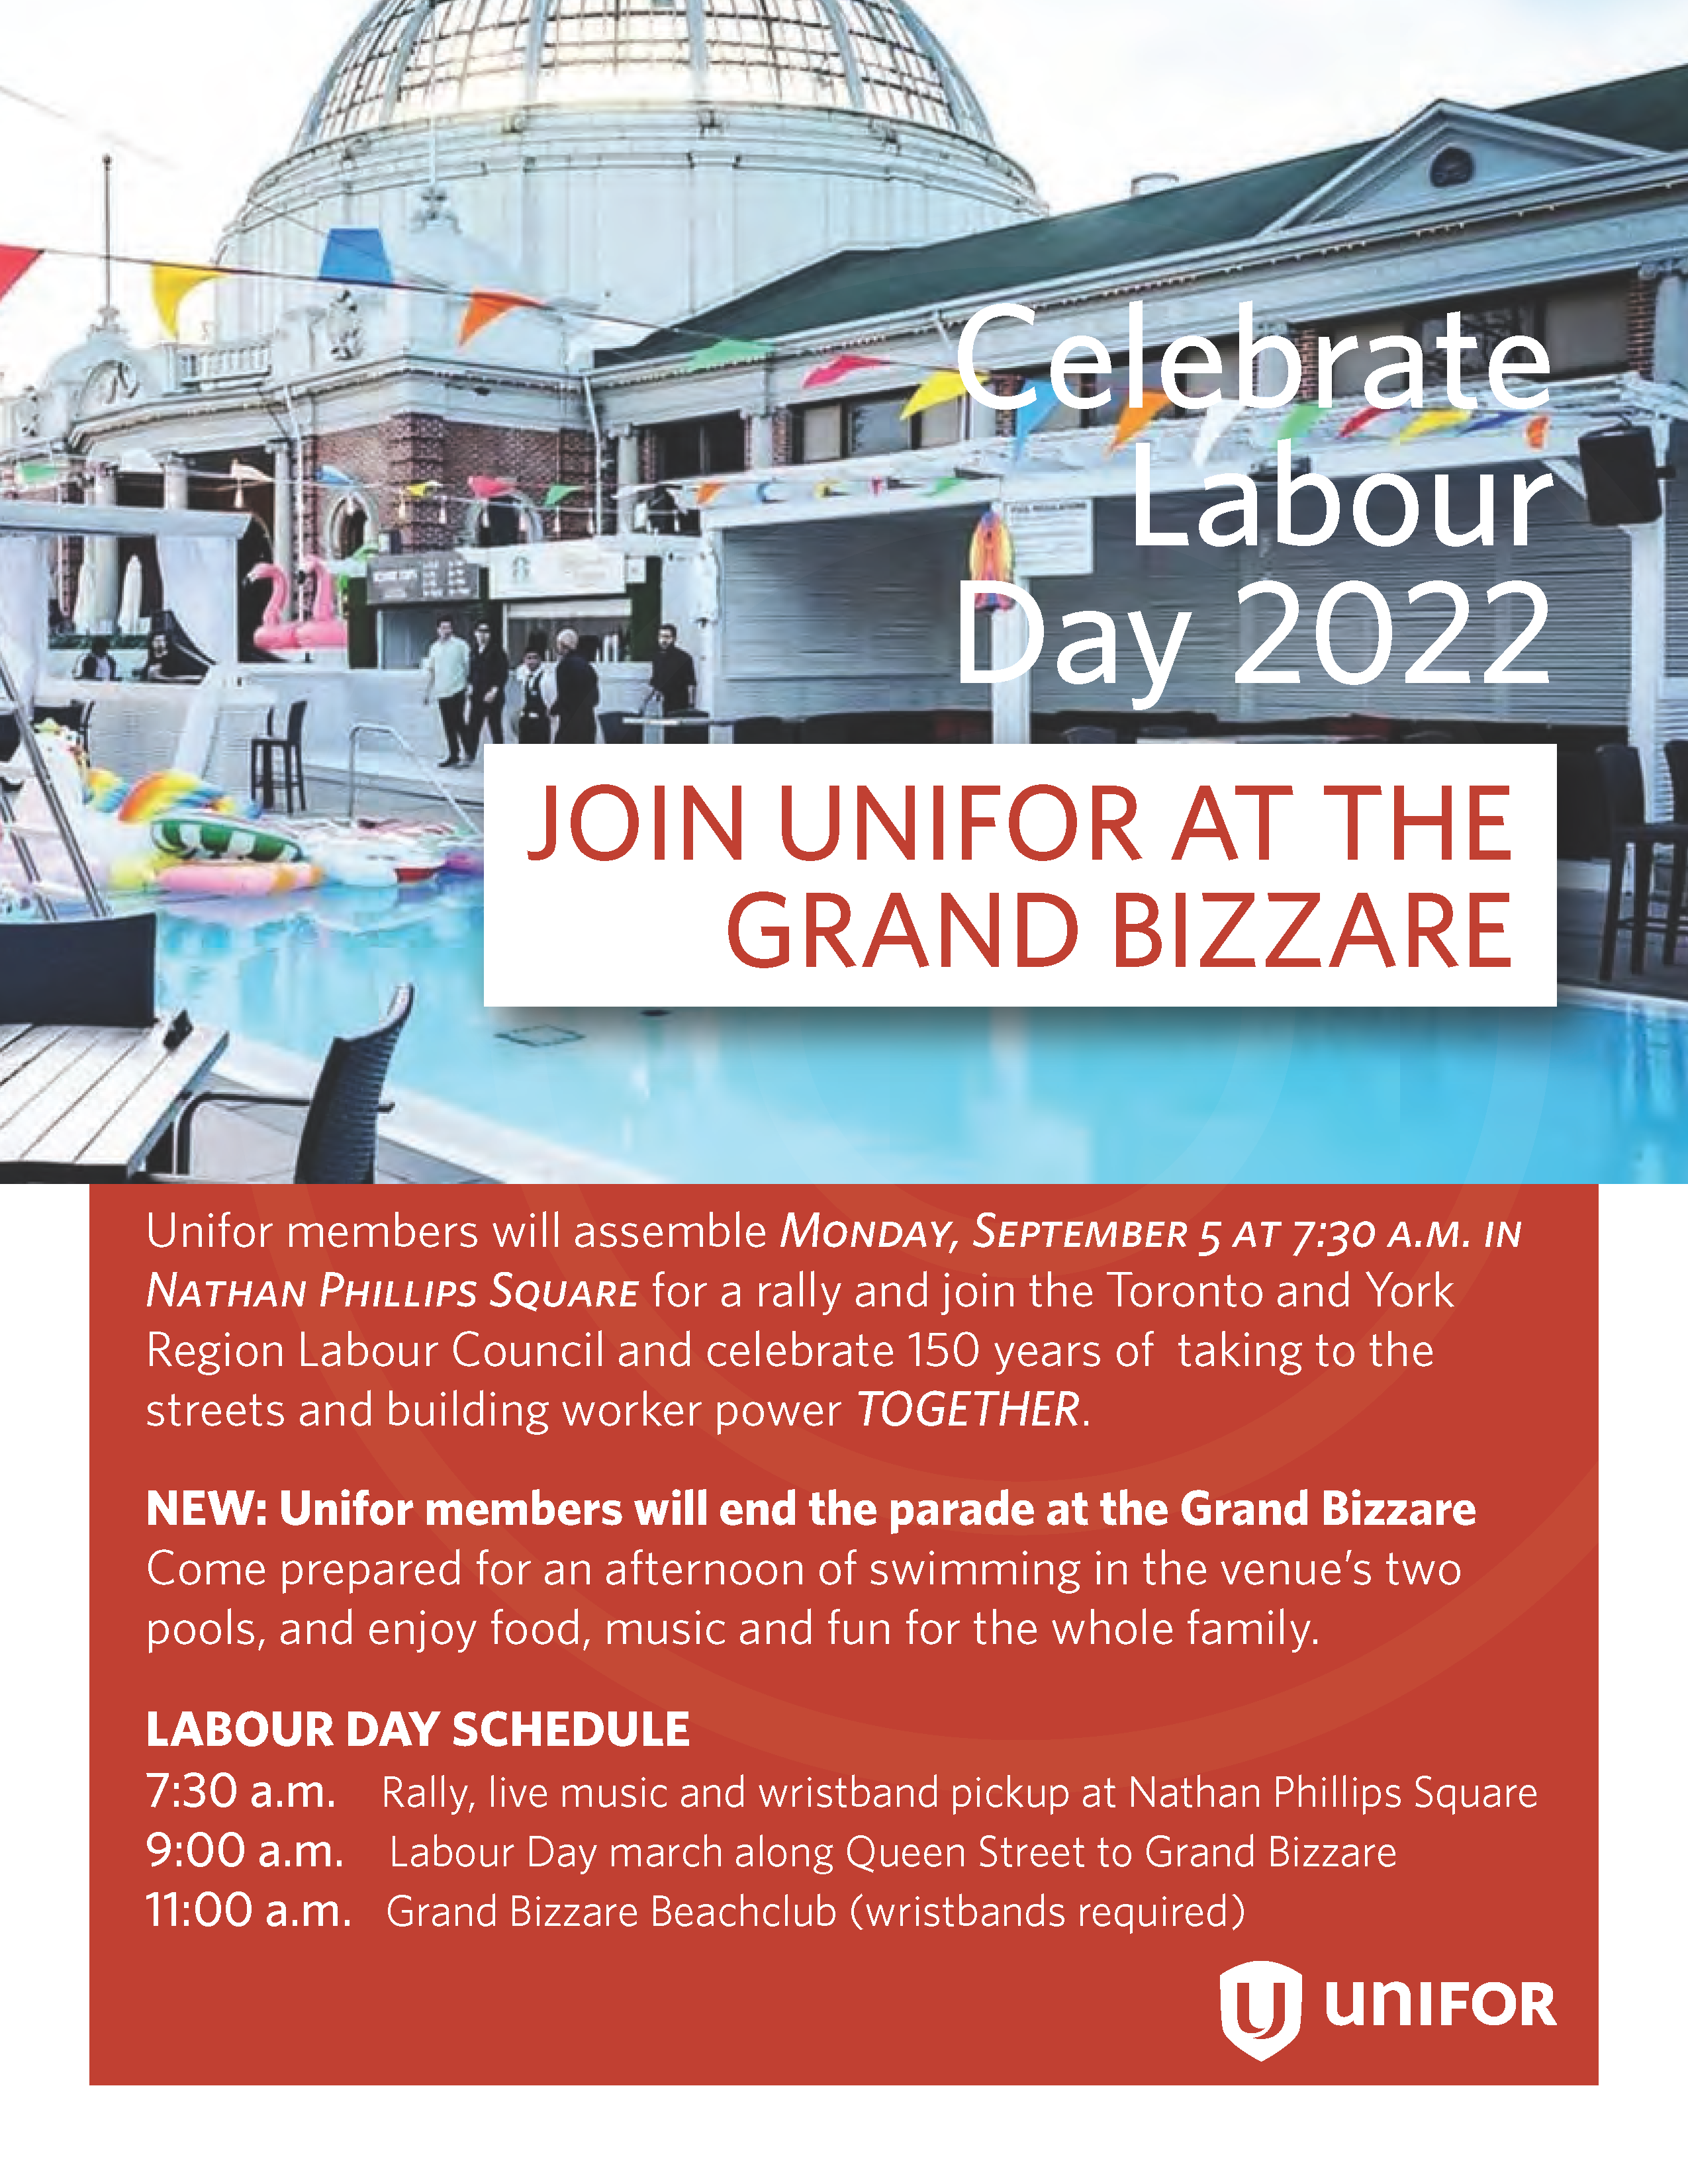 Unifor poster for Labour Day Toronto